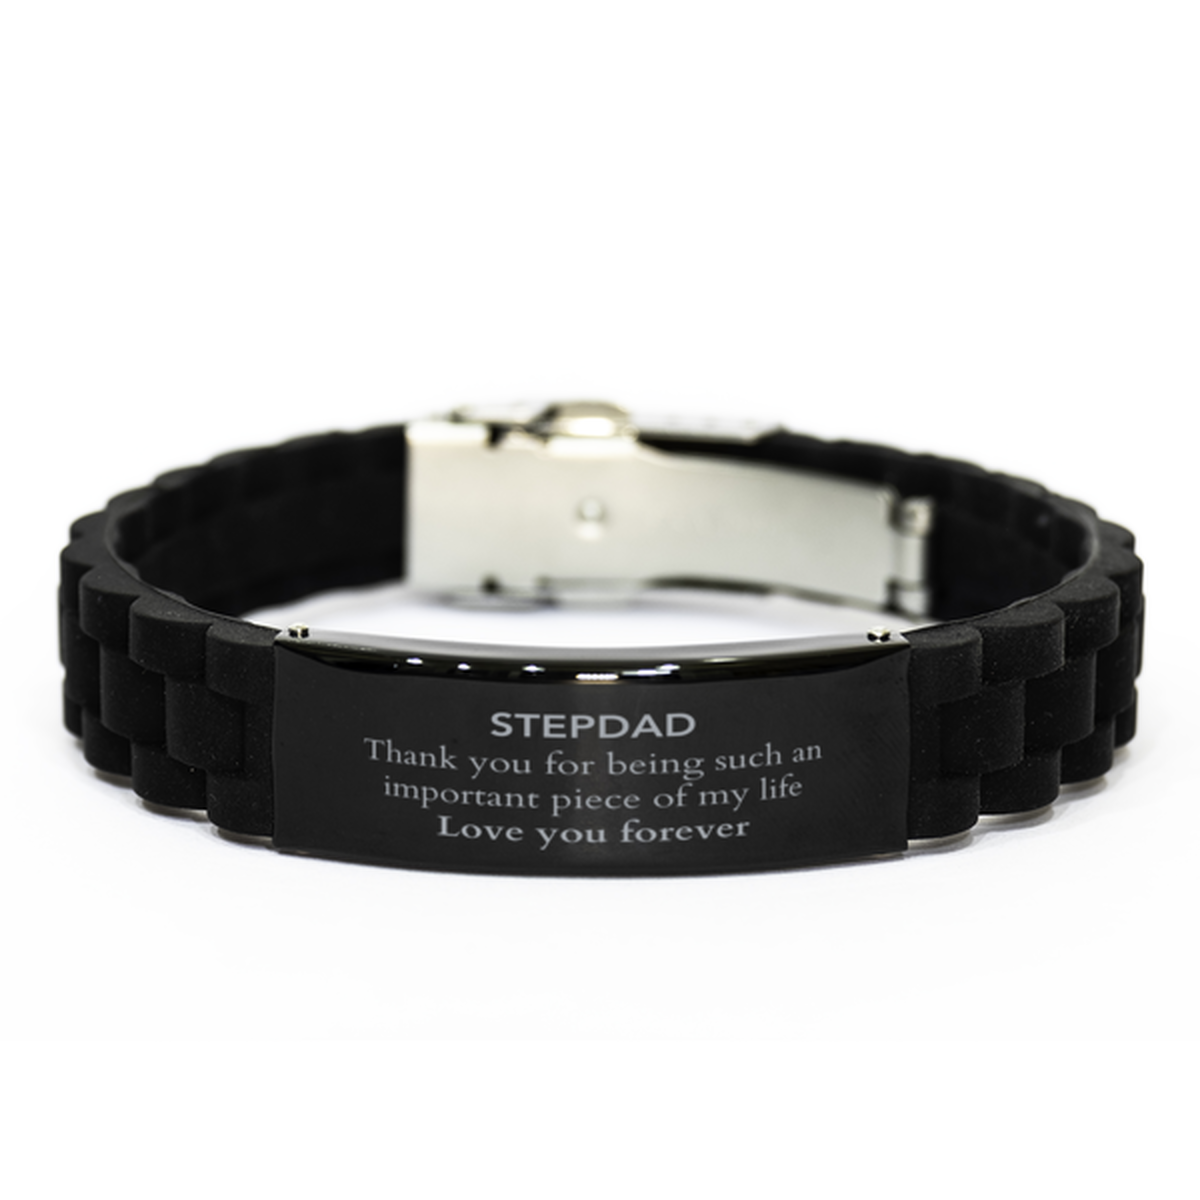 Appropriate Stepdad Black Glidelock Clasp Bracelet Epic Birthday Gifts for Stepdad Thank you for being such an important piece of my life Stepdad Christmas Mothers Fathers Day